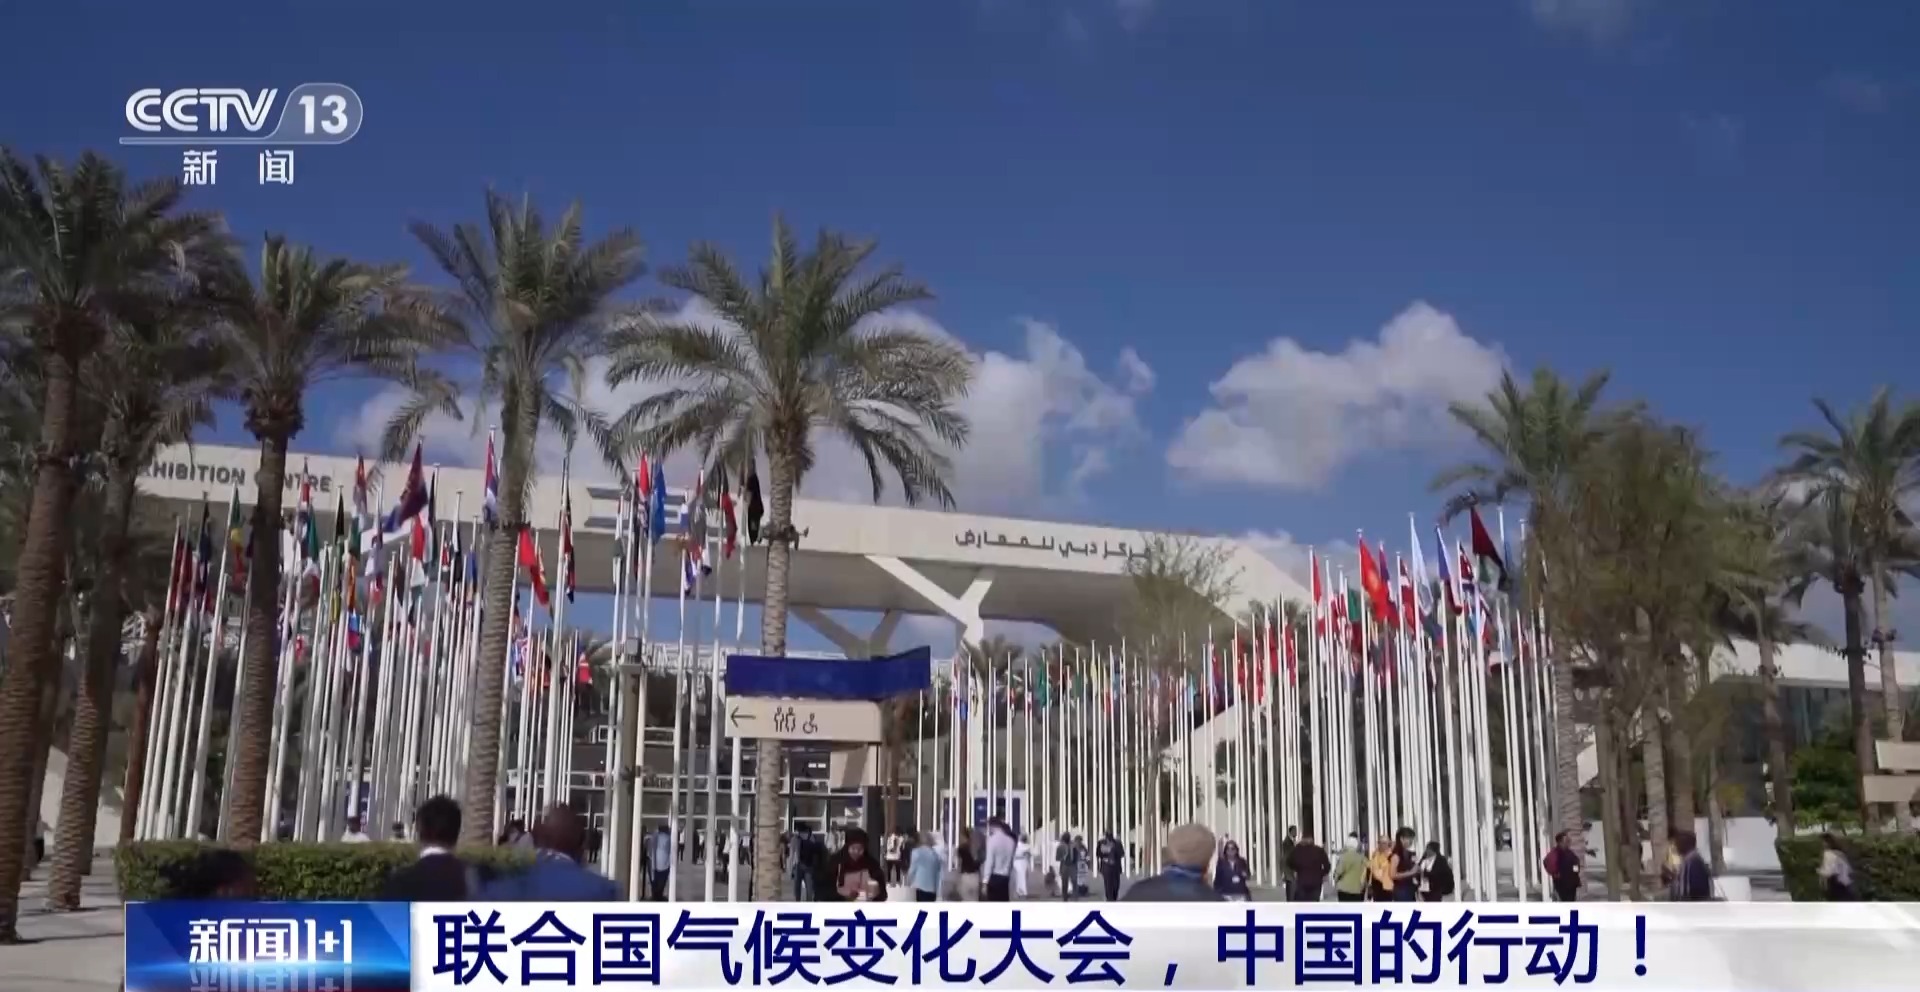 UN Climate Change Conference, see what actions in China